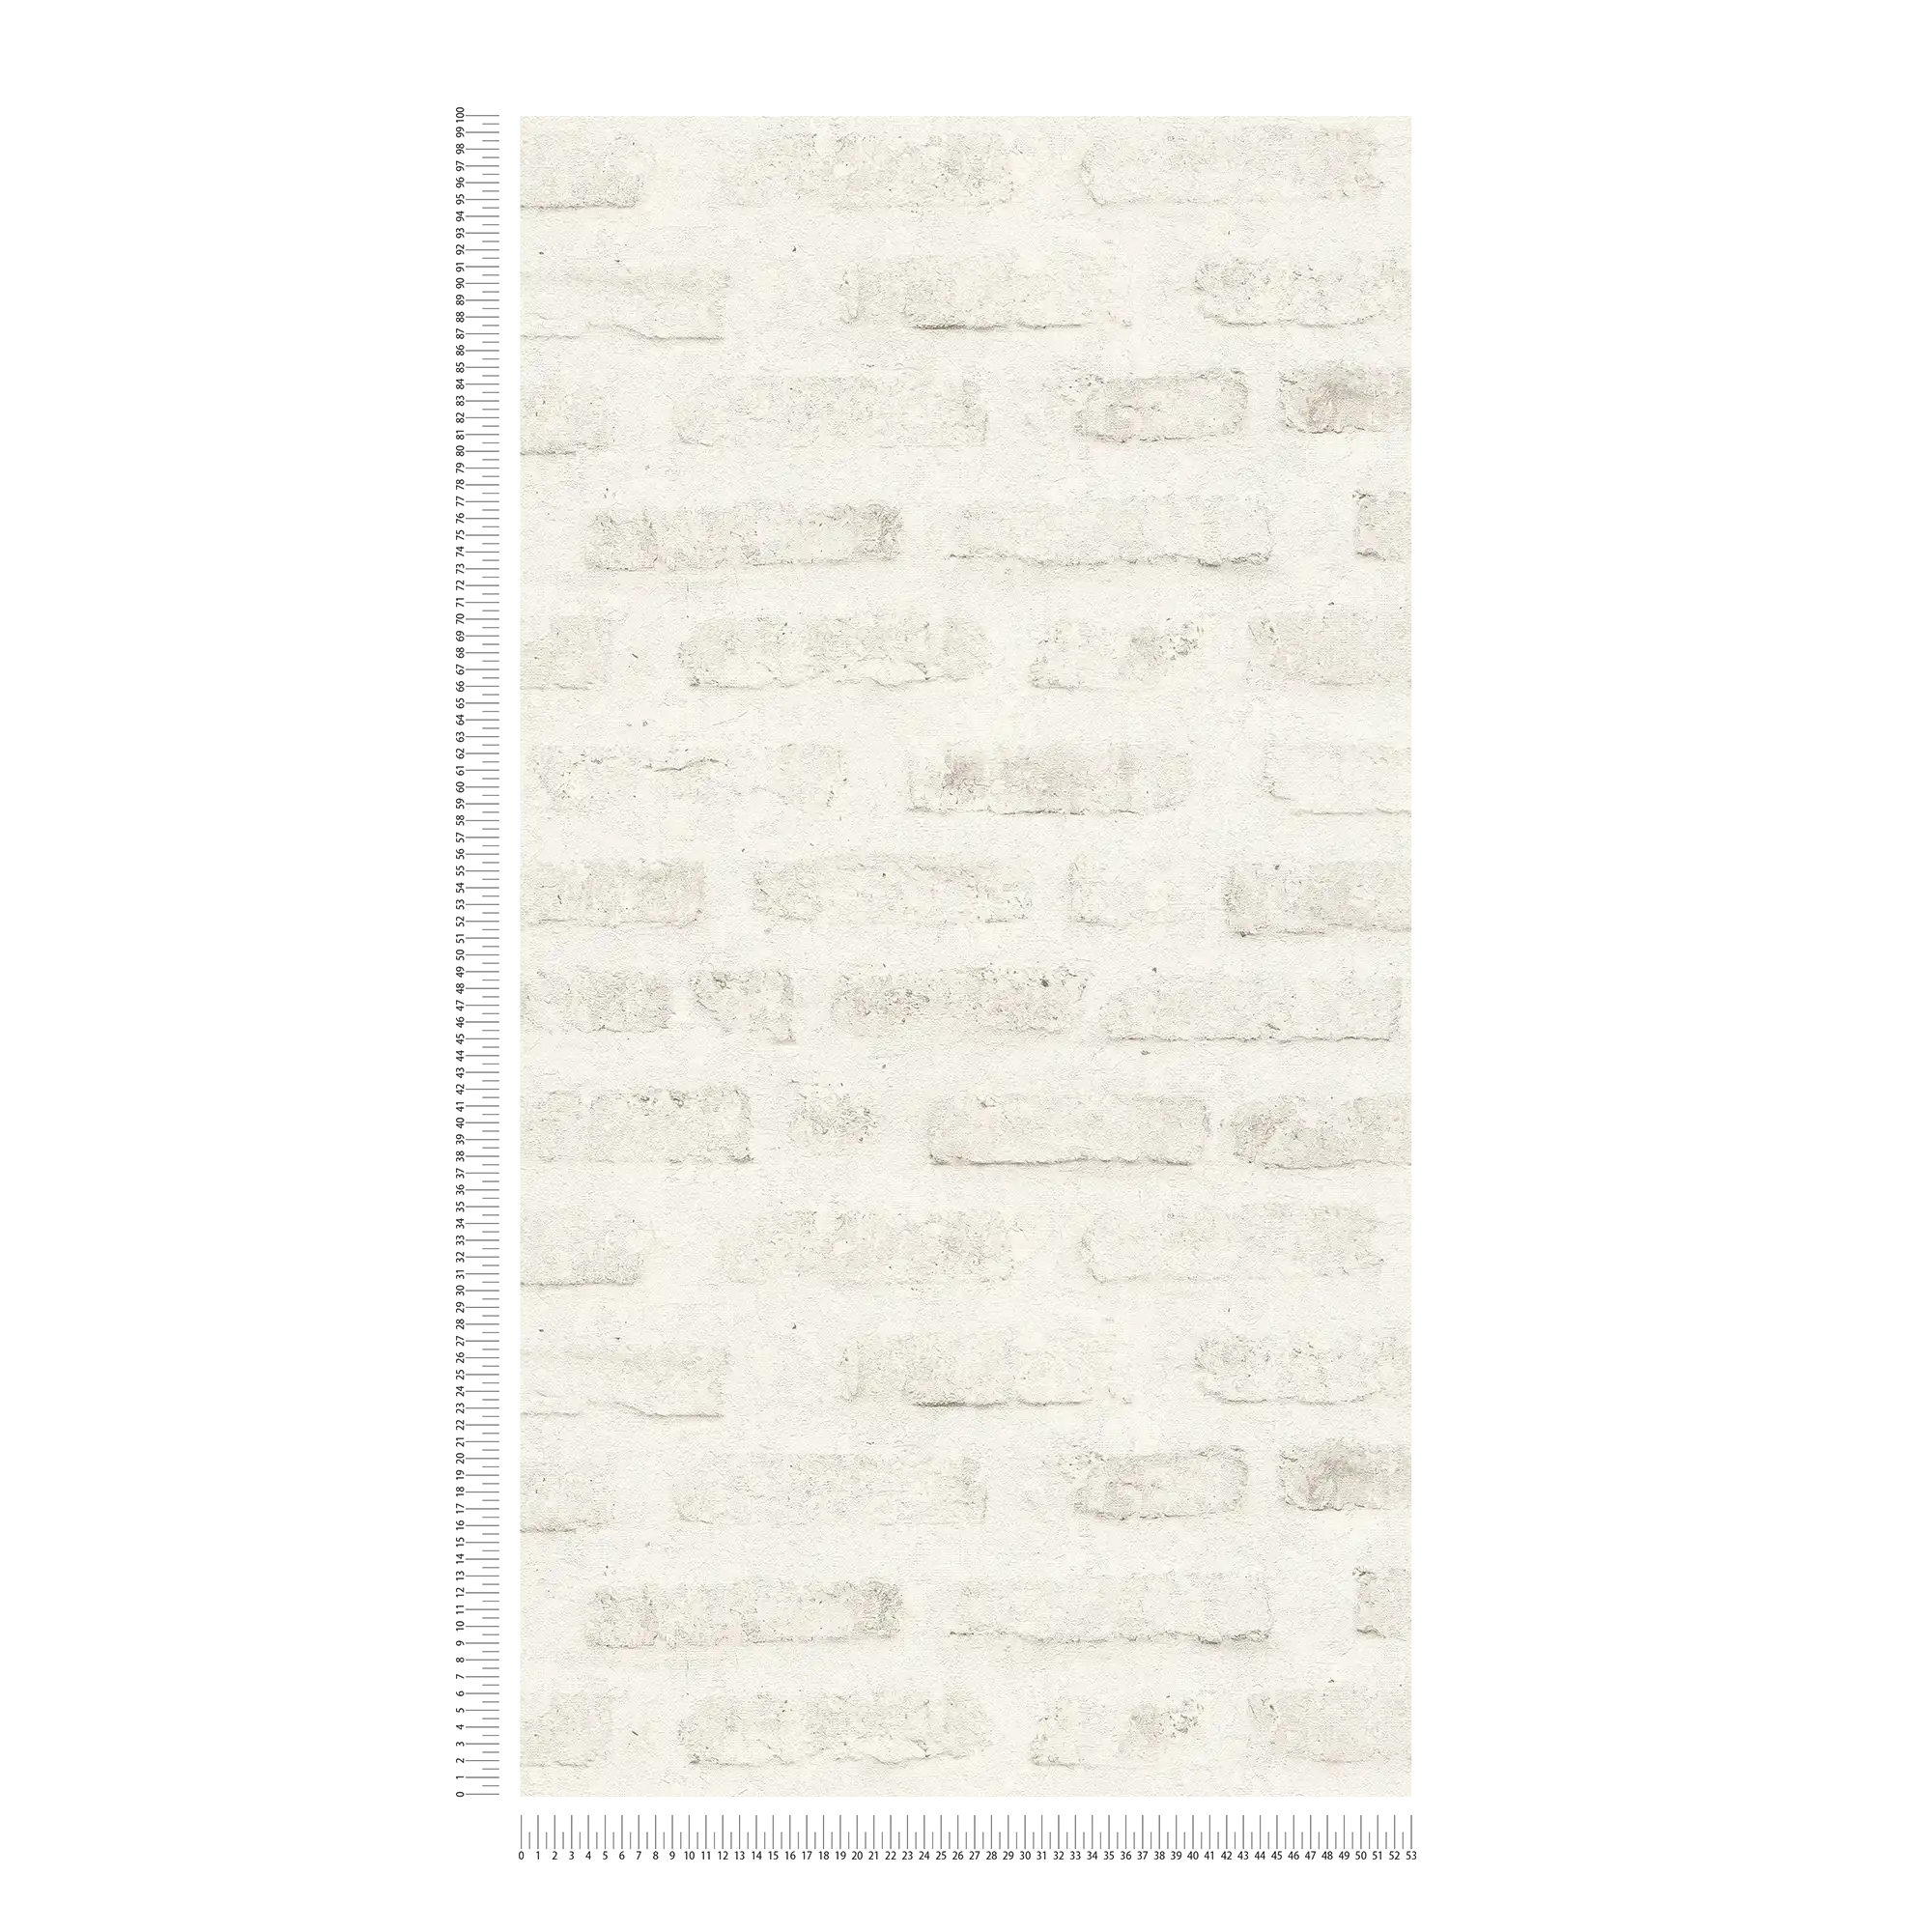             Industrial style wallpaper with stone look and wall motif - grey, white
        